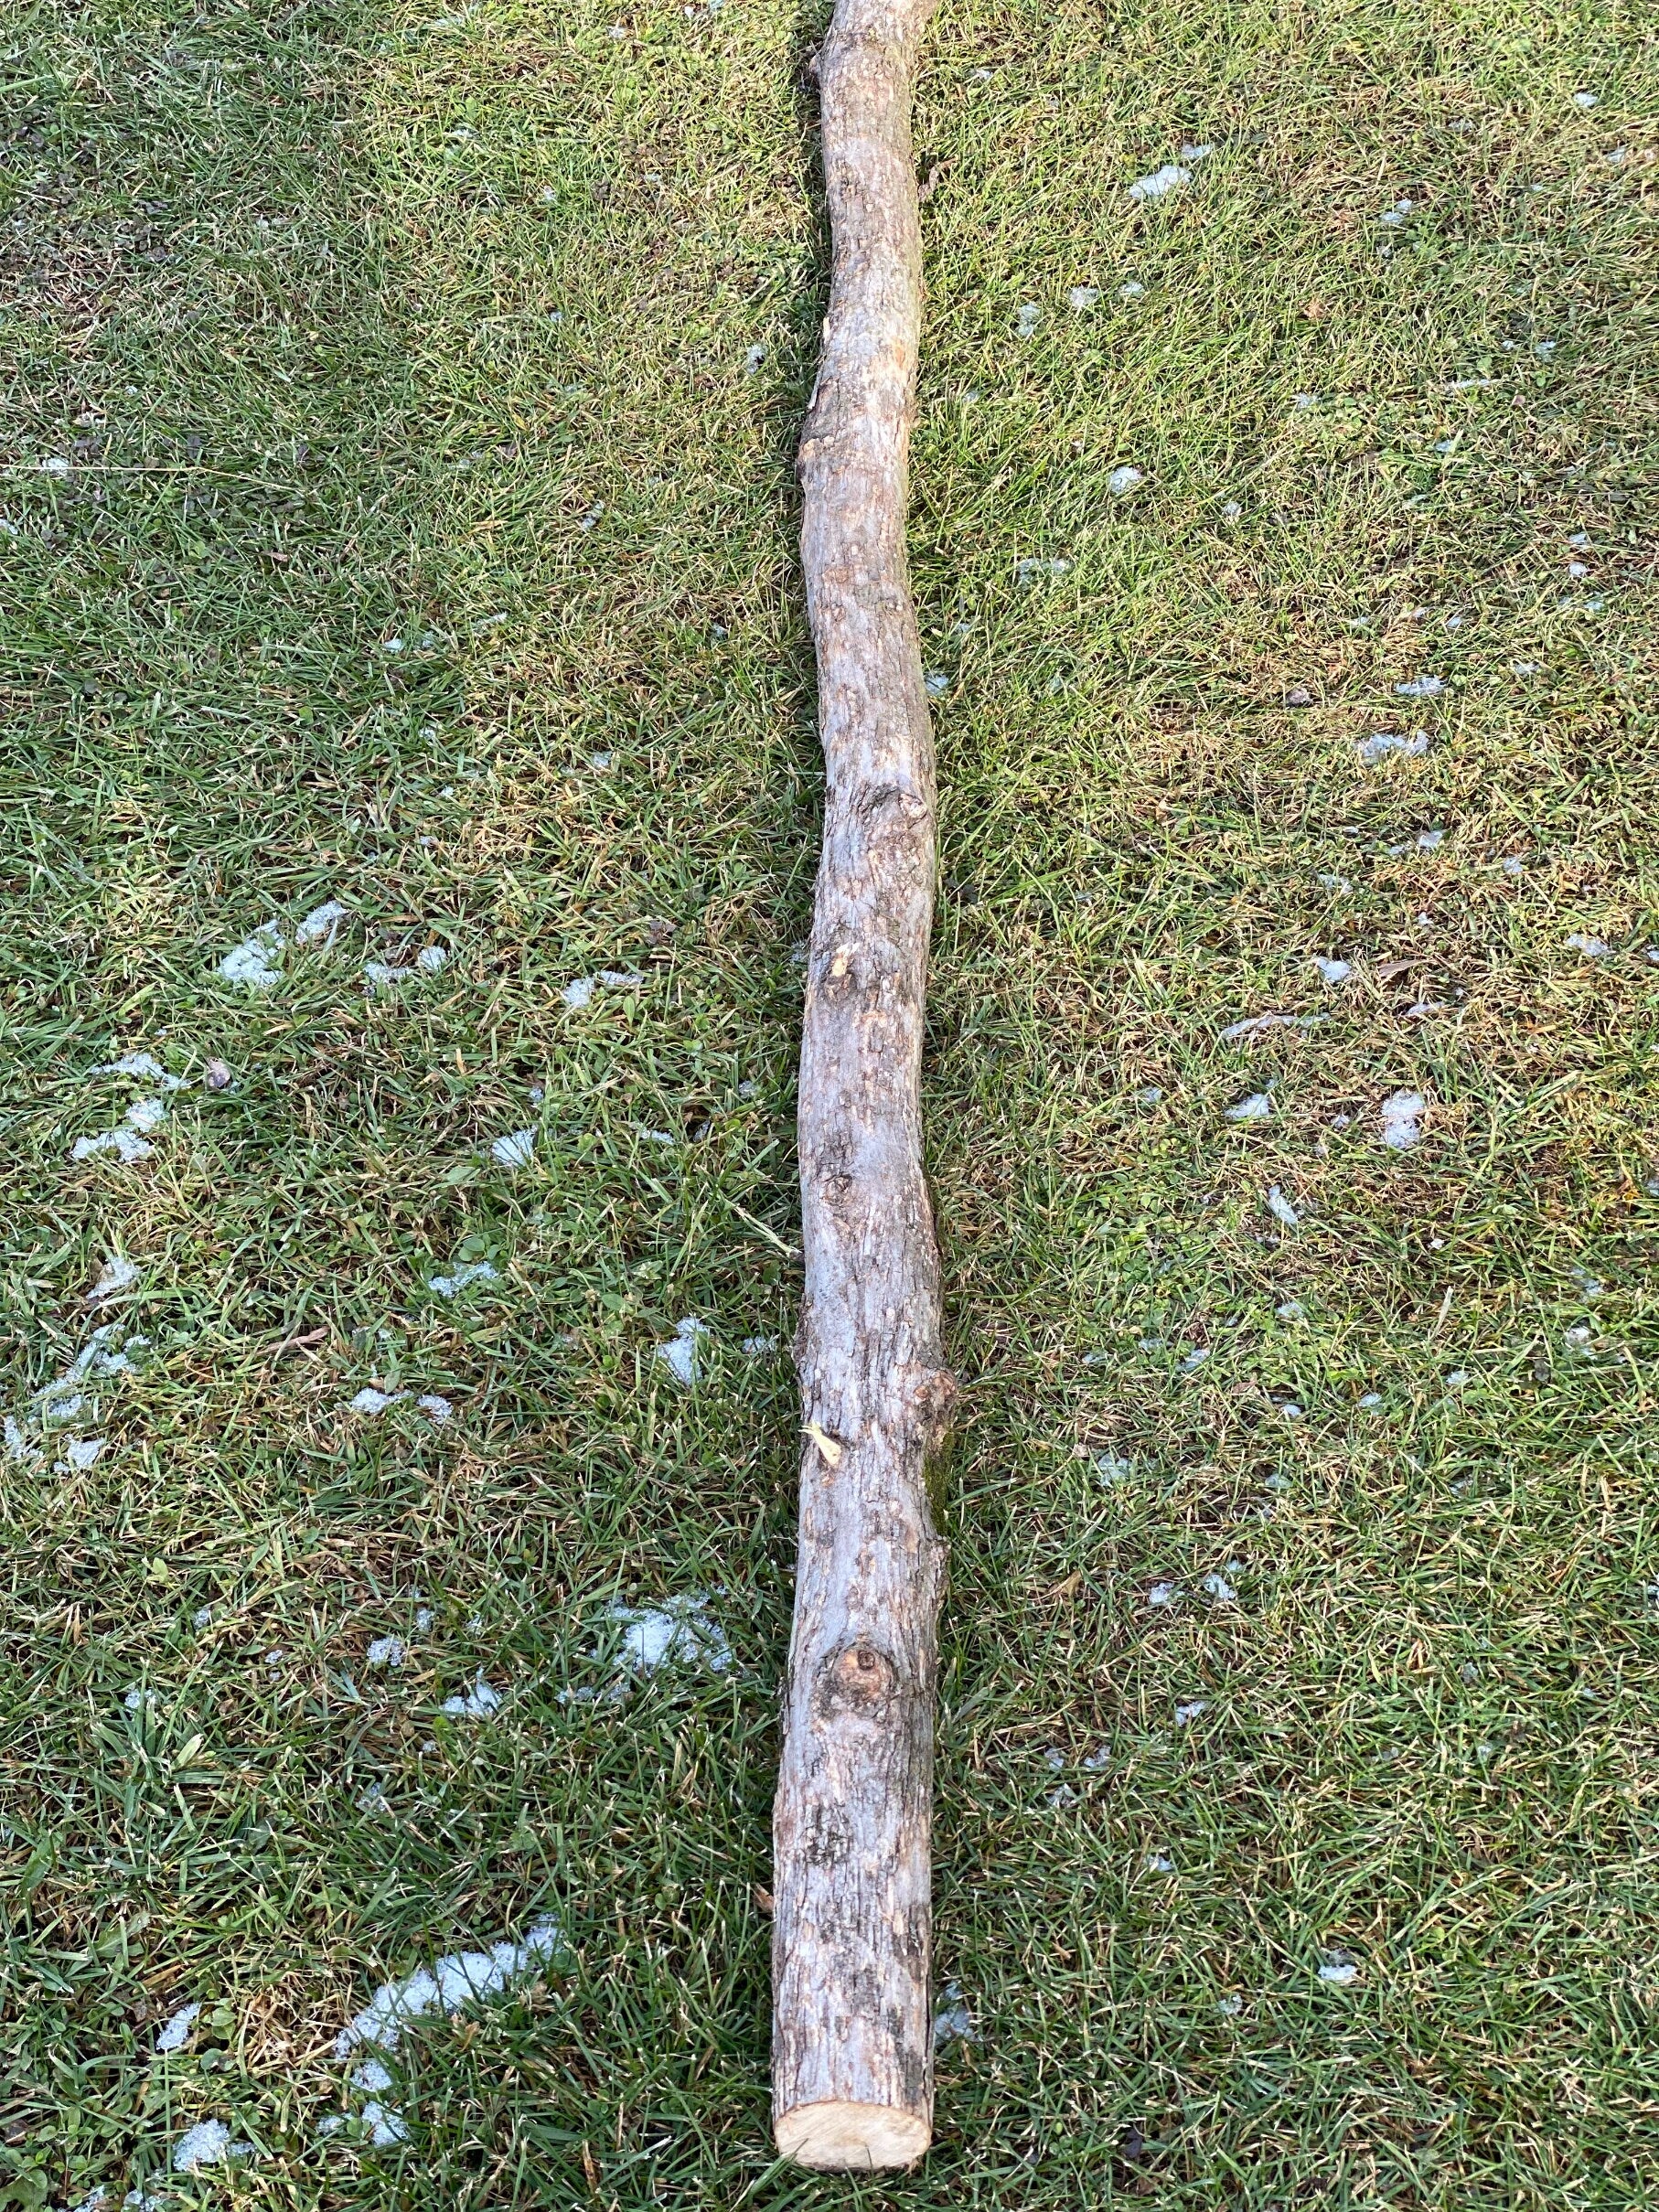 Ironwood Log, Hophornbeam, Approximately 55 Inches Long by About 2.5 Inches in Diameter